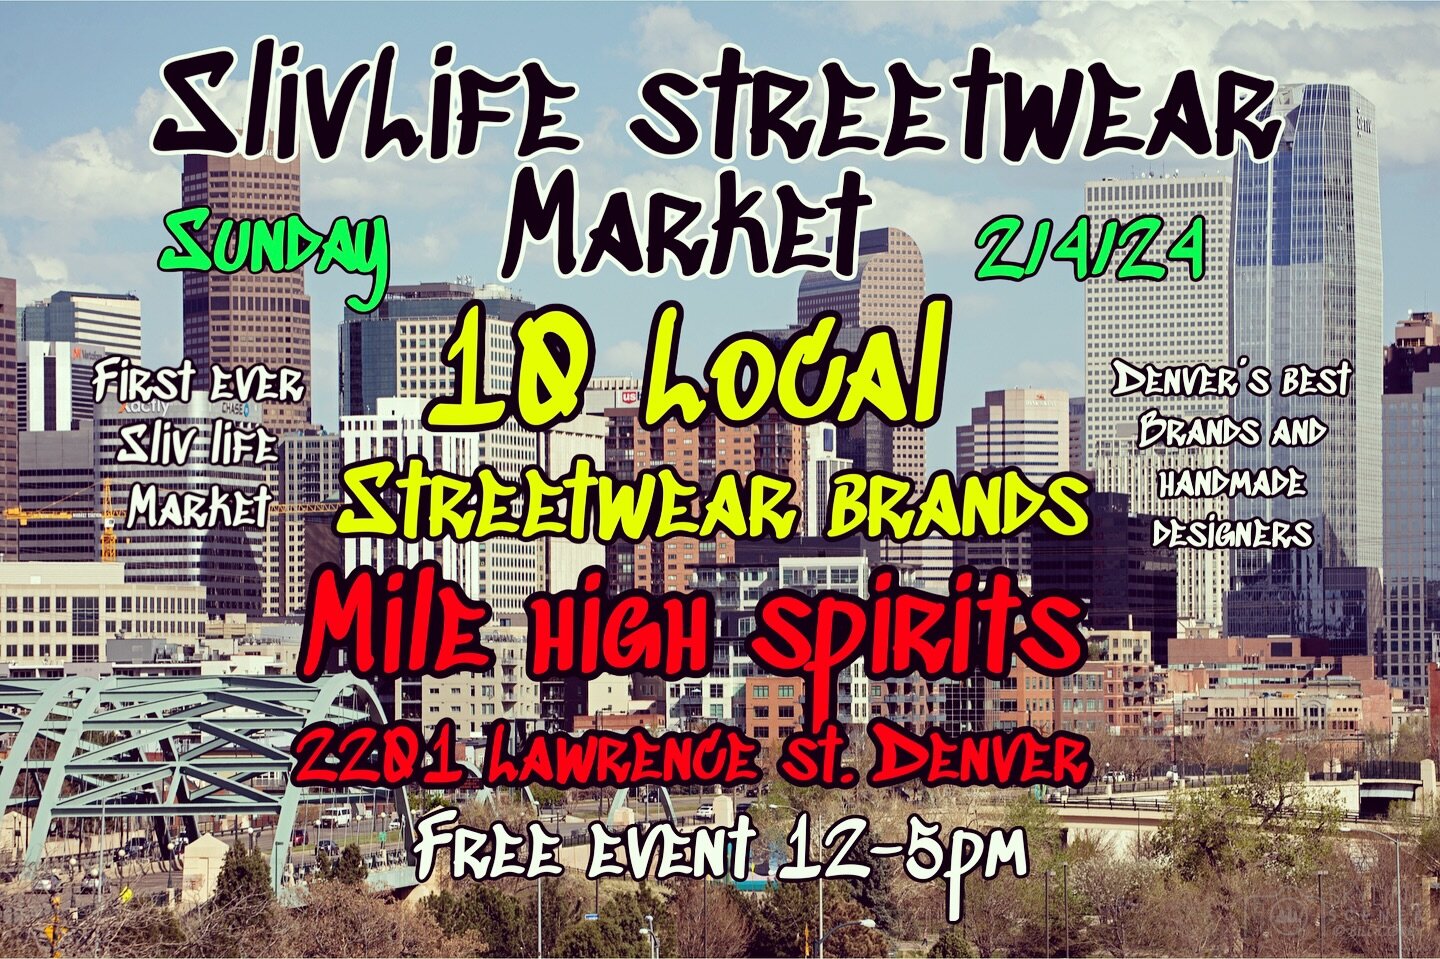 Denver! First ever Sliv Life Streetwear Market! Sunday 2/4/24 12-5pm free event at @milehighspirits in Denver 

Ive wanted to host my own pop up market for a little while now and I&rsquo;m excited to finally go for it! I wanted to give other brands a